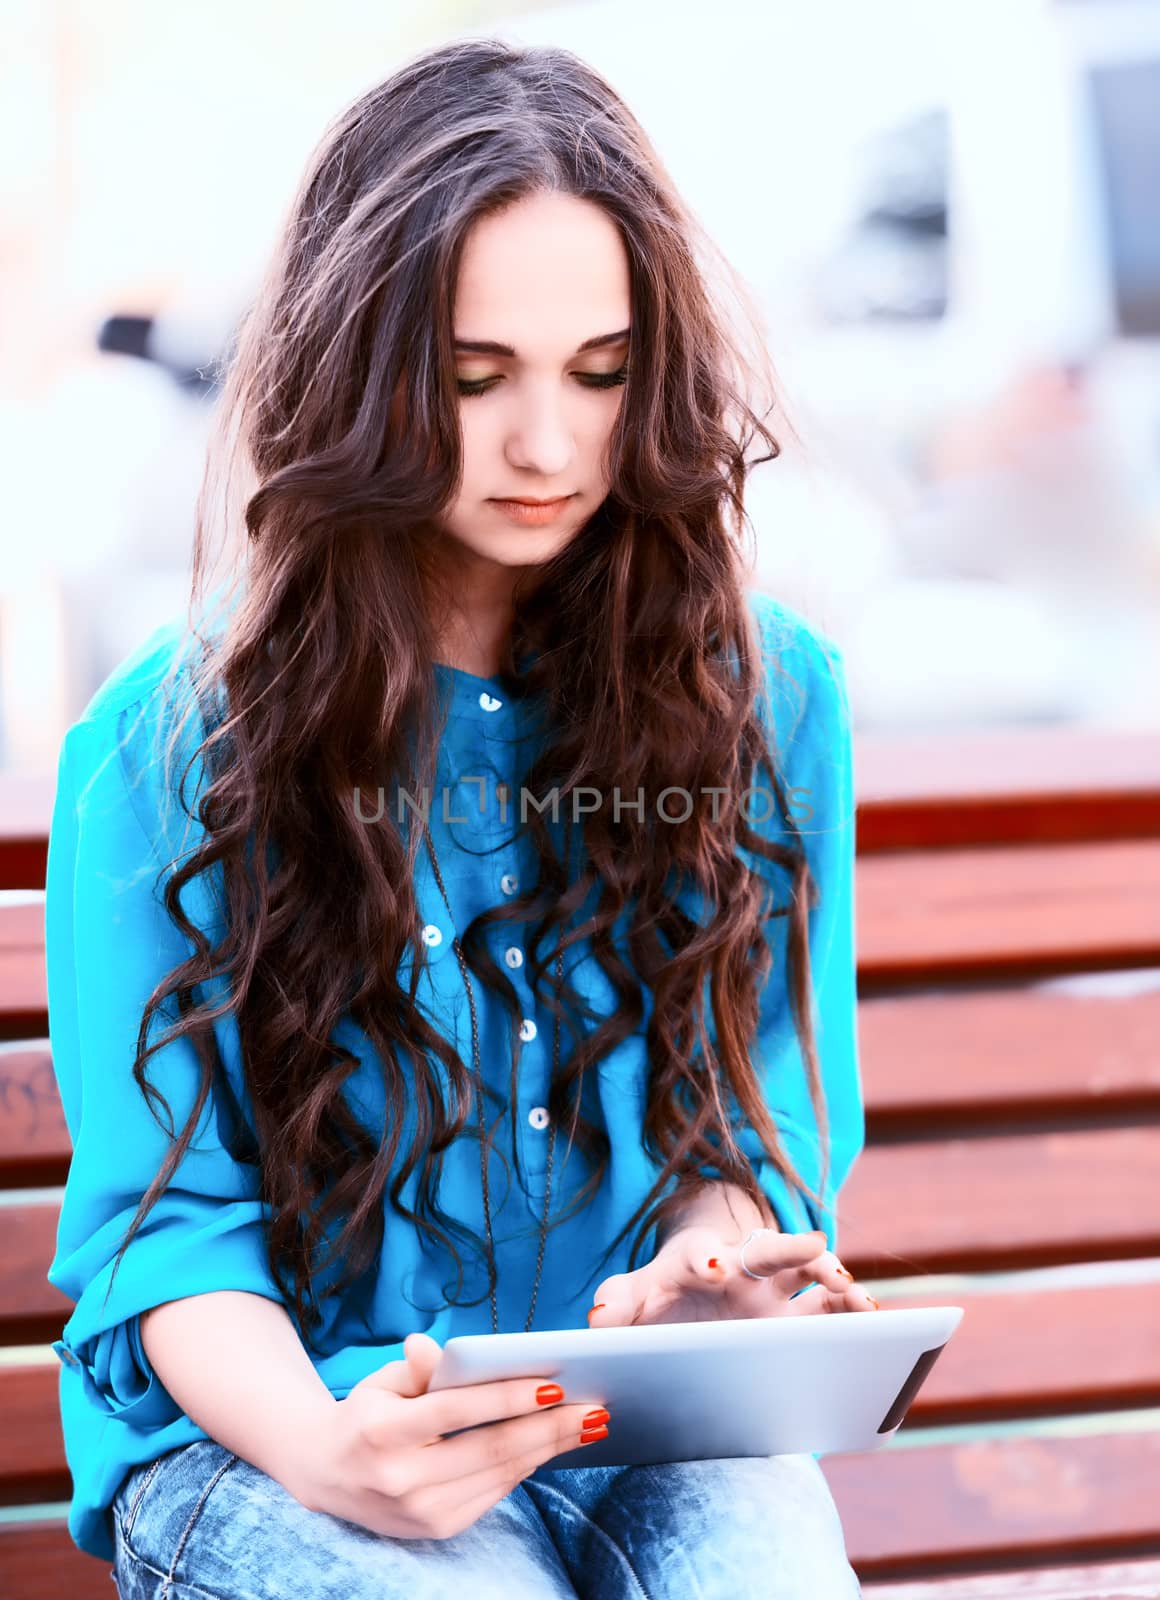 Young woman using tablet by Emevil